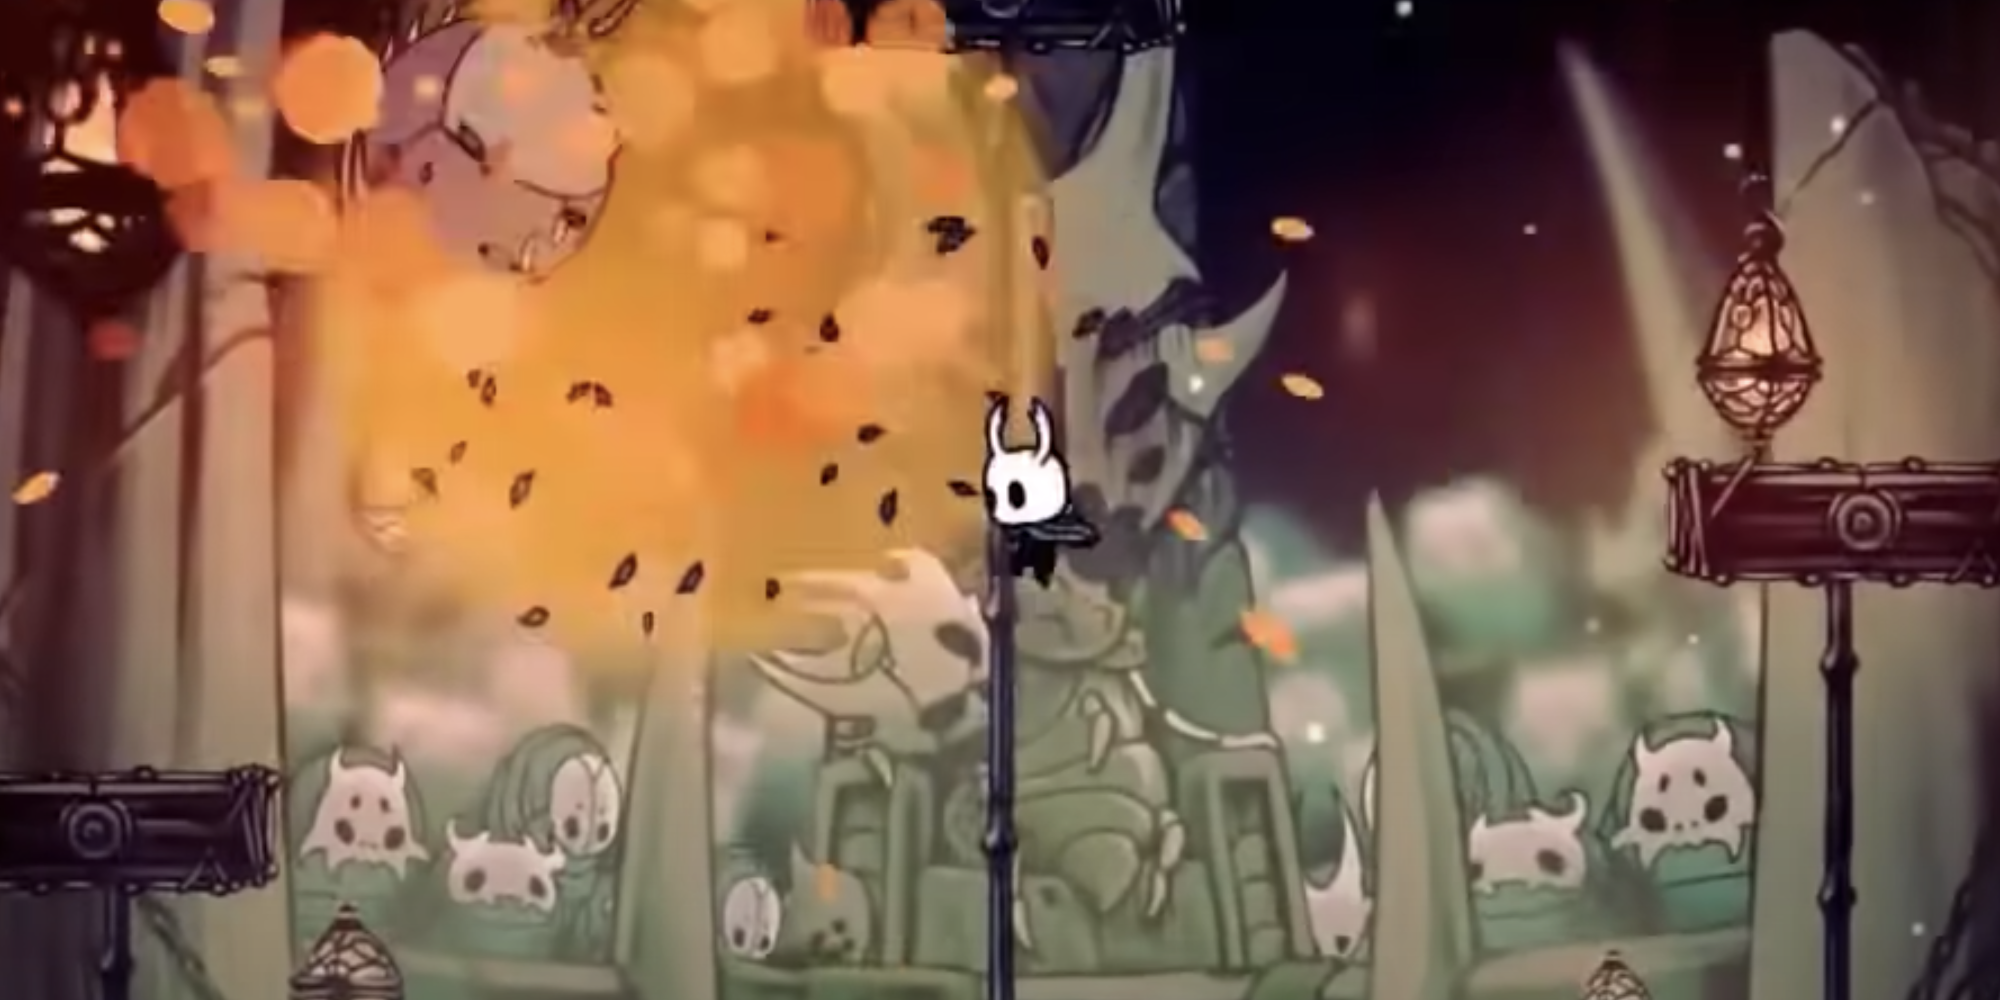 Hollow Knight Trial of the Fool